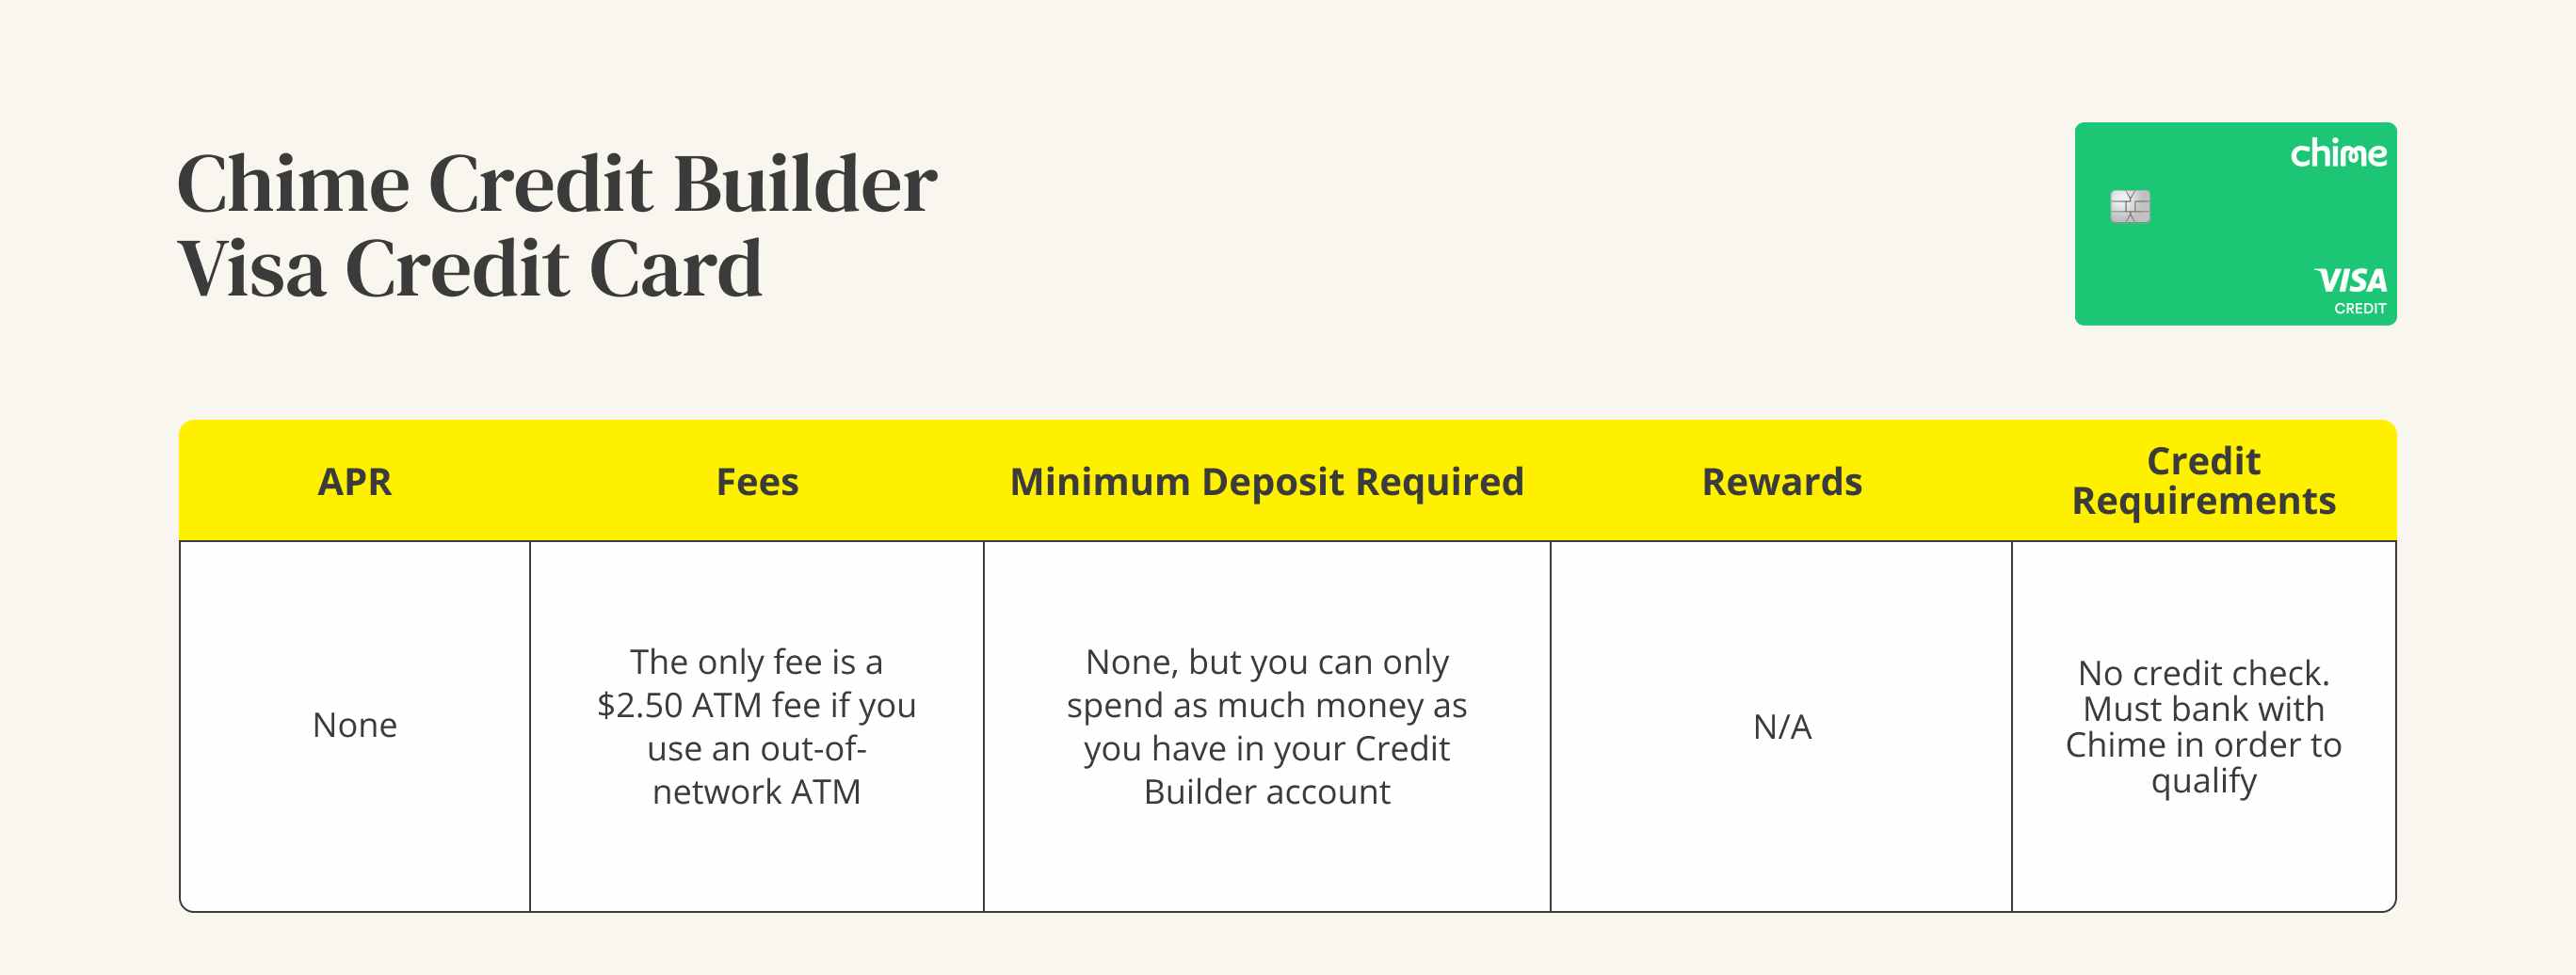 A graphic showing the APR, fees, minimum deposit, rewards, and credit requirements for a Chime Credit Builder Visa credit card